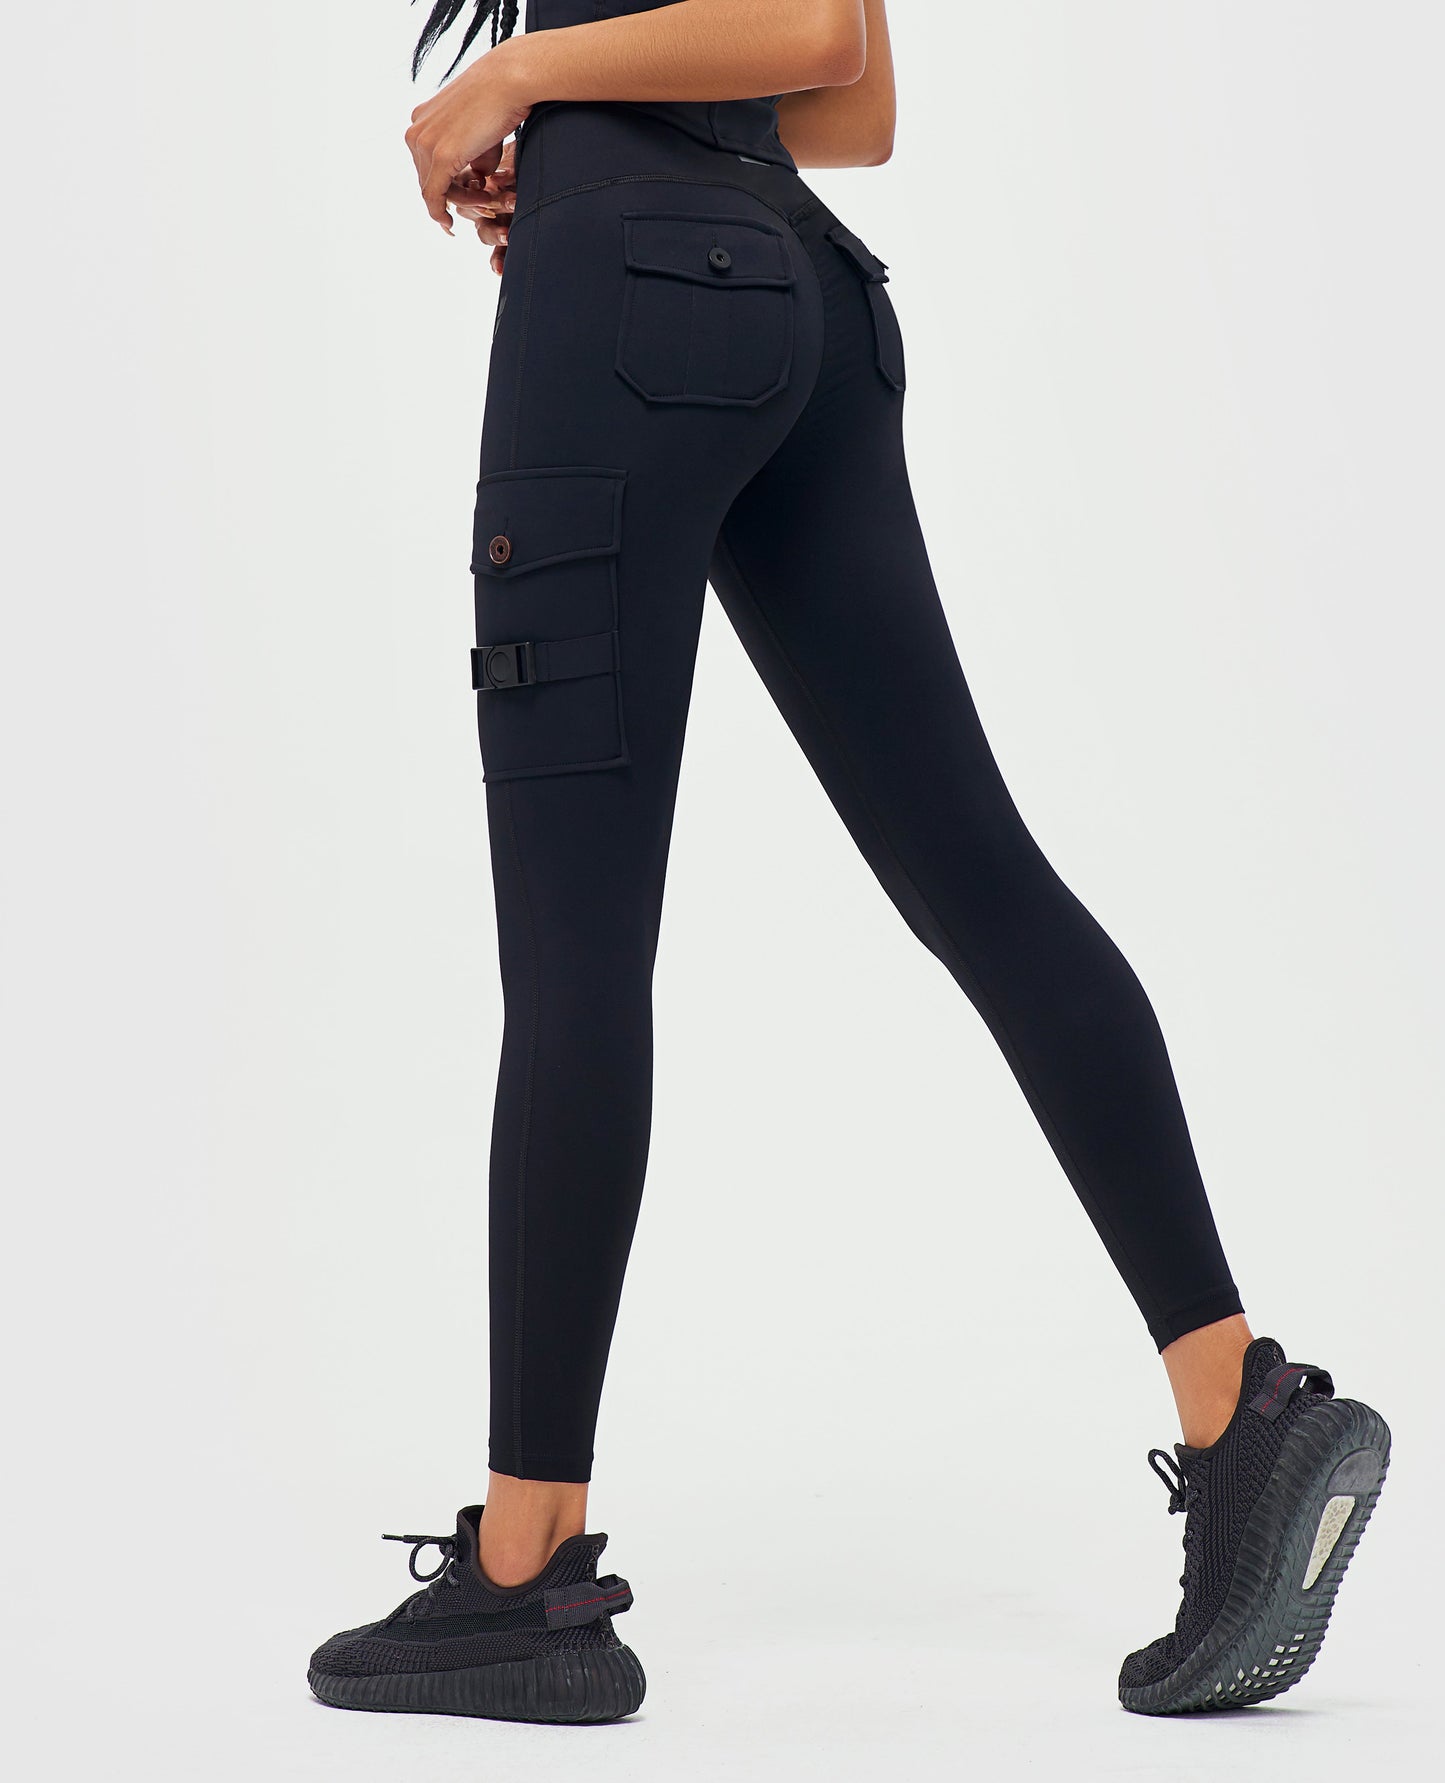 Gym Leggings with Pockets Black, activewear